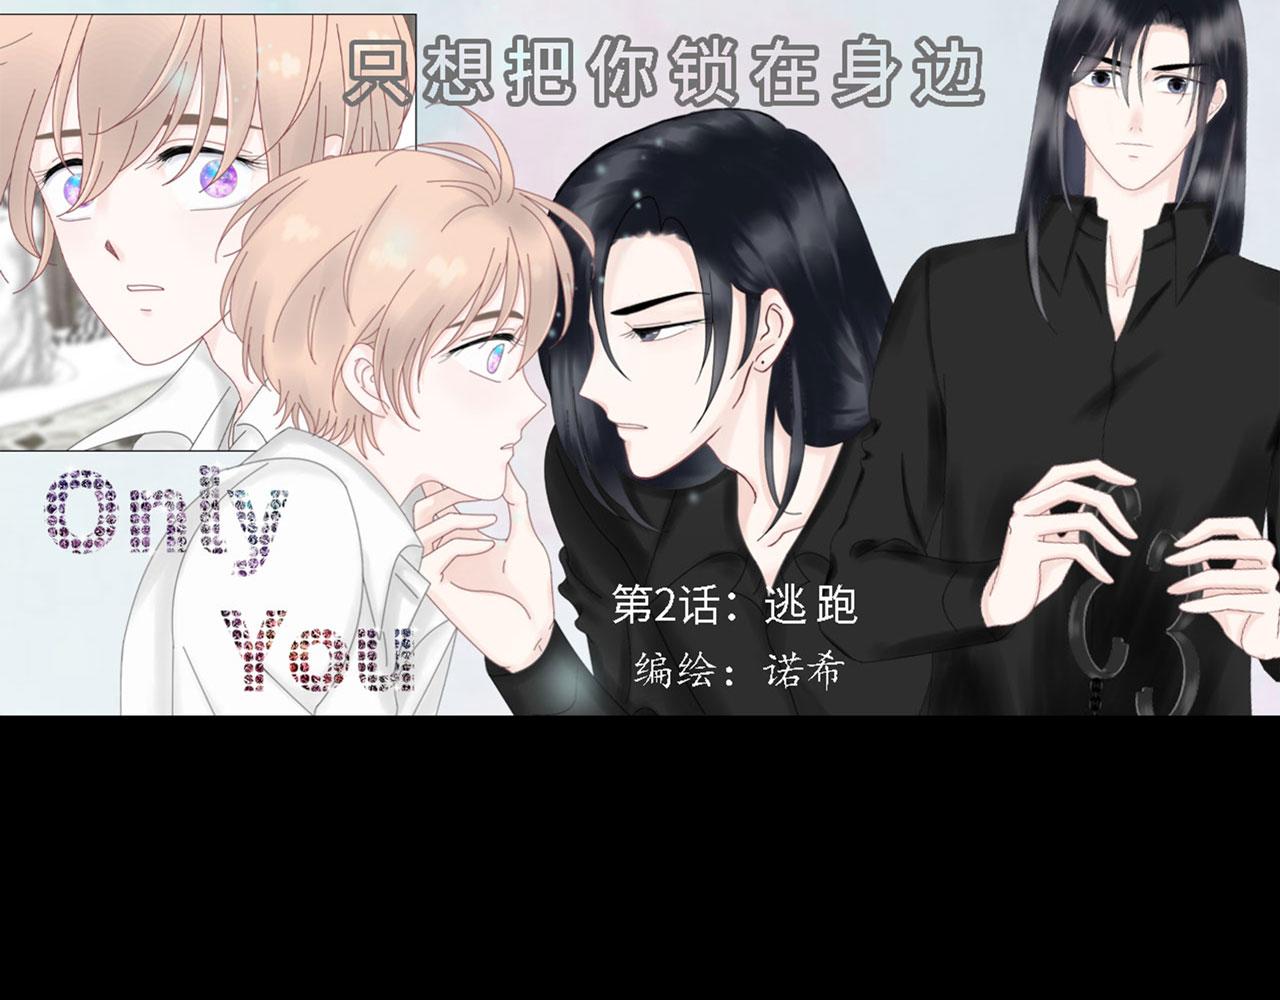 Only You - 第二話 逃跑(1/3) - 1